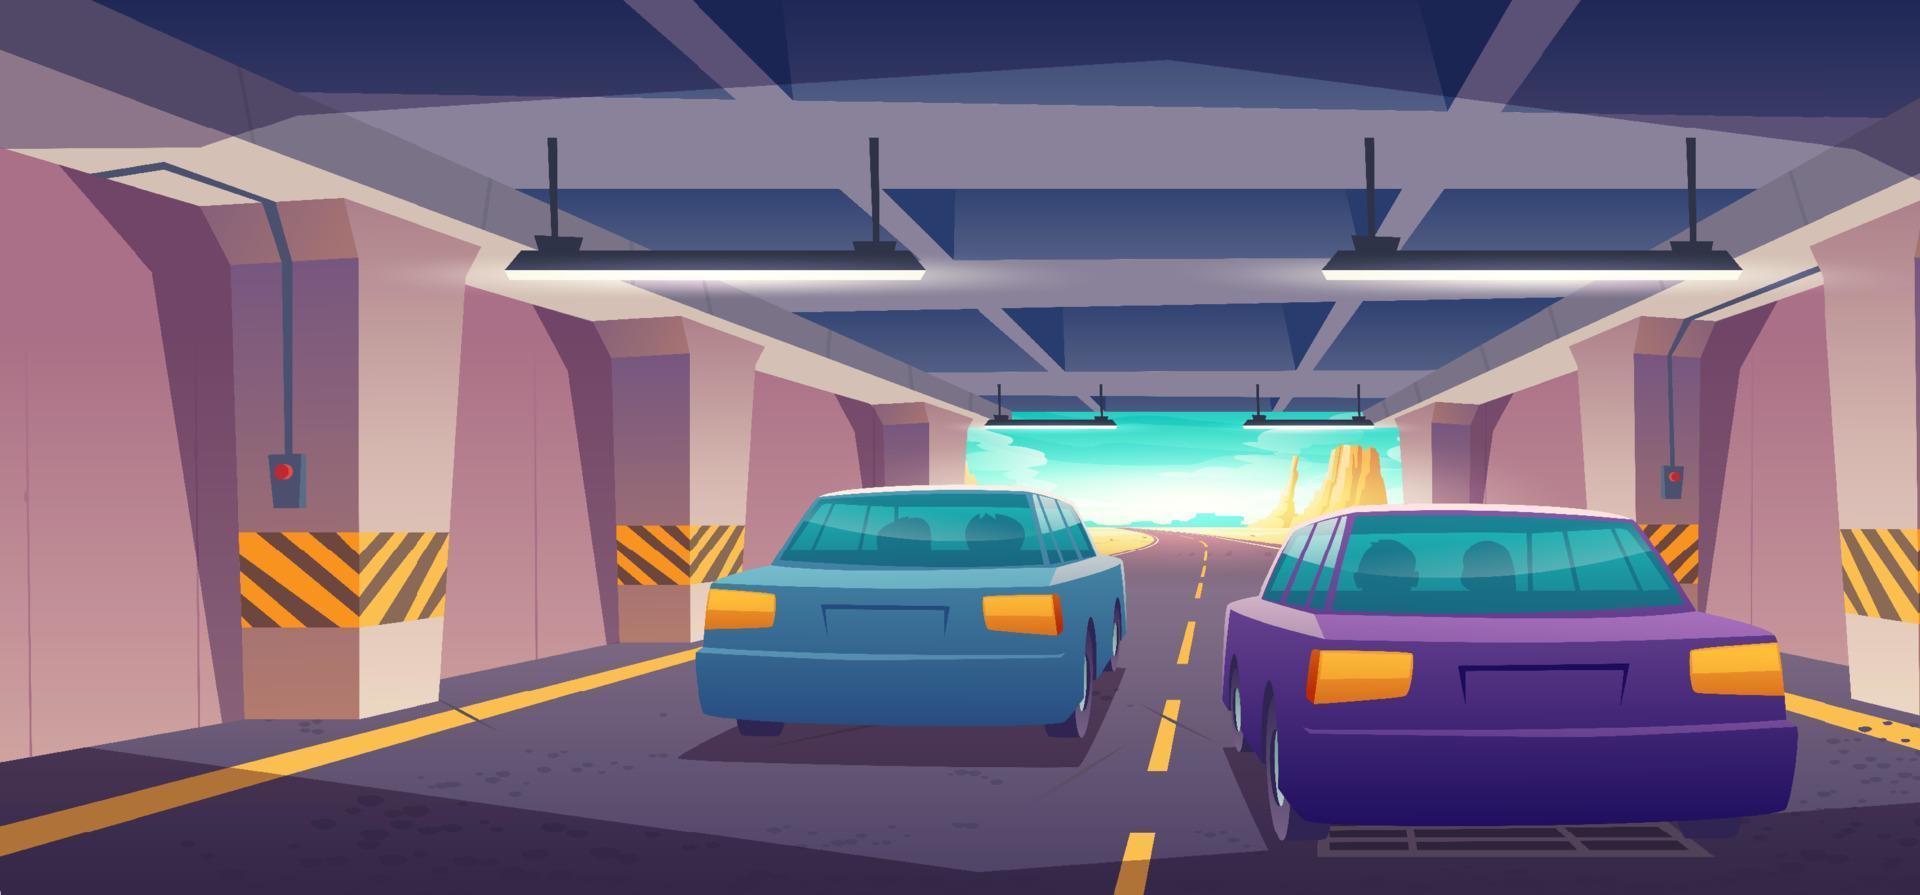 Car exit underground tunnel rear view, highway vector